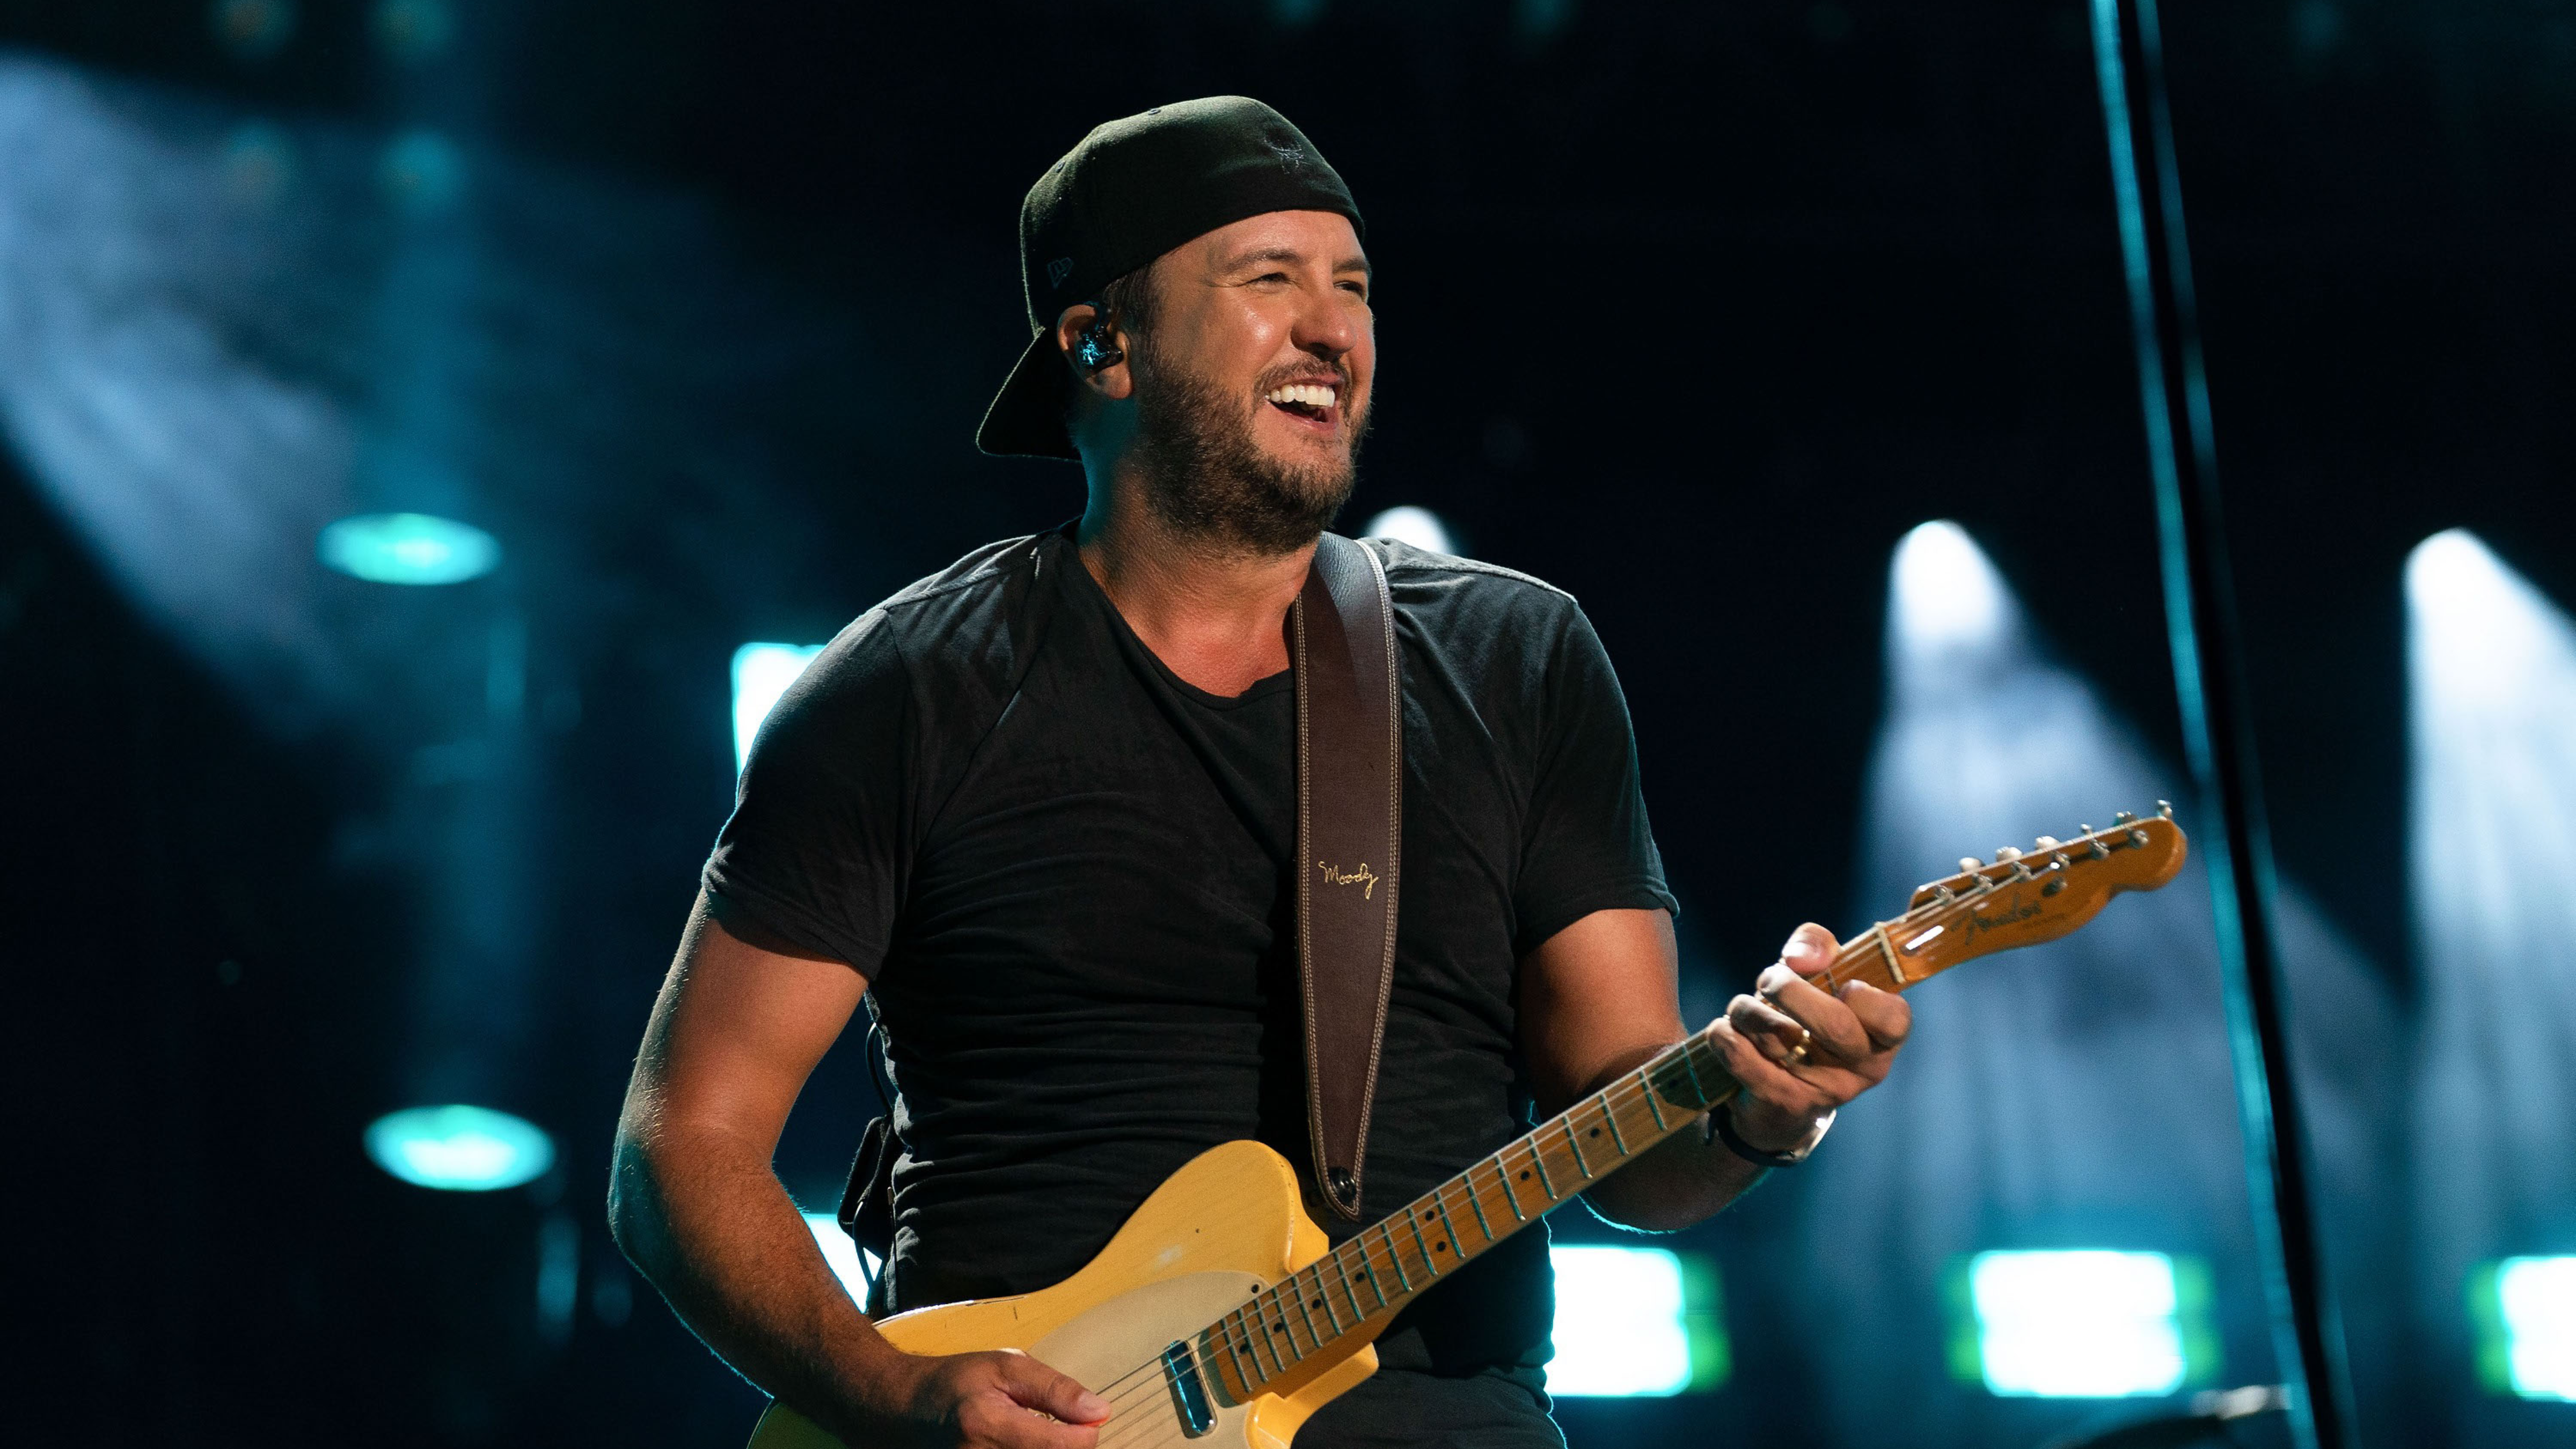 CMA FEST - CMA Fest, the music event of summer, led by Dierks Bentley and Elle King, celebrates its grand return, bringing the top music acts together on one stage for three full hours of cant-miss collaborations and unforgettable performances WEDNESDAY, AUG. 3, at 8/7c on ABC. 